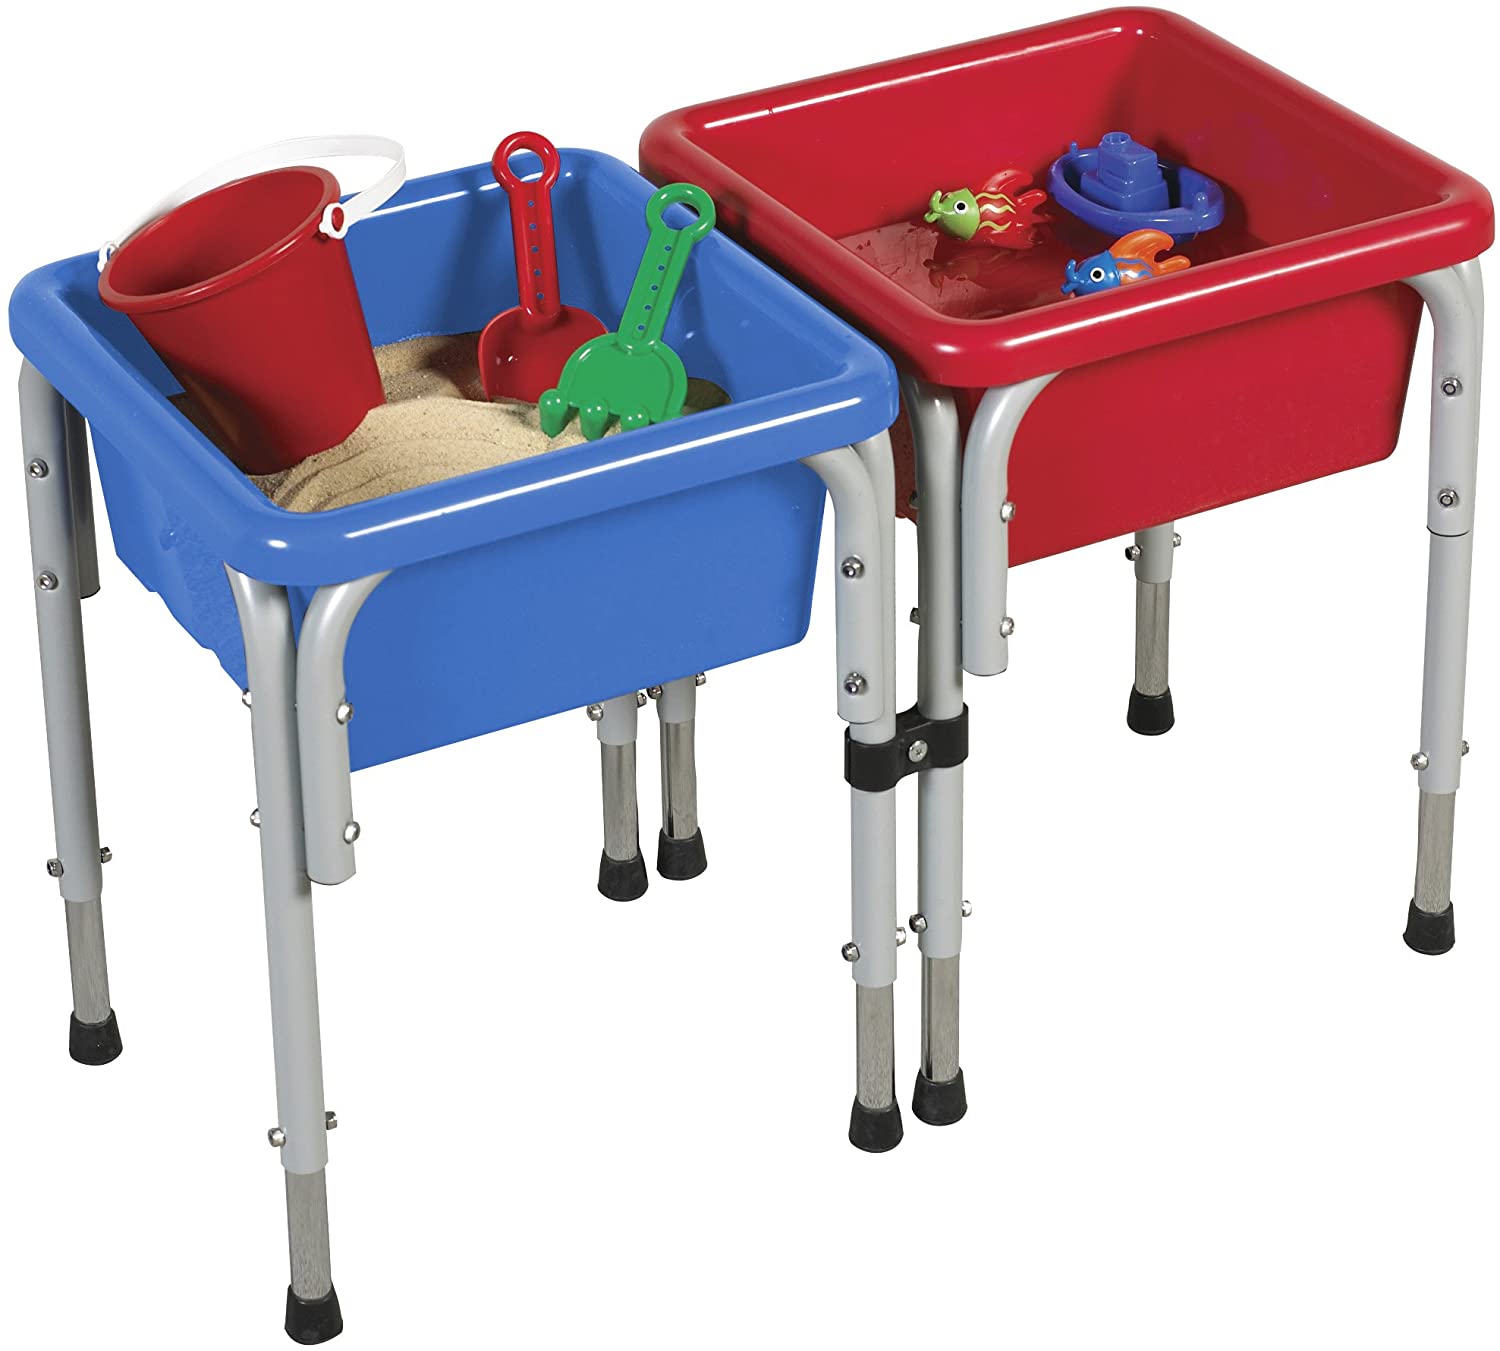 Assorted Sand and Water Adjustable Play Center